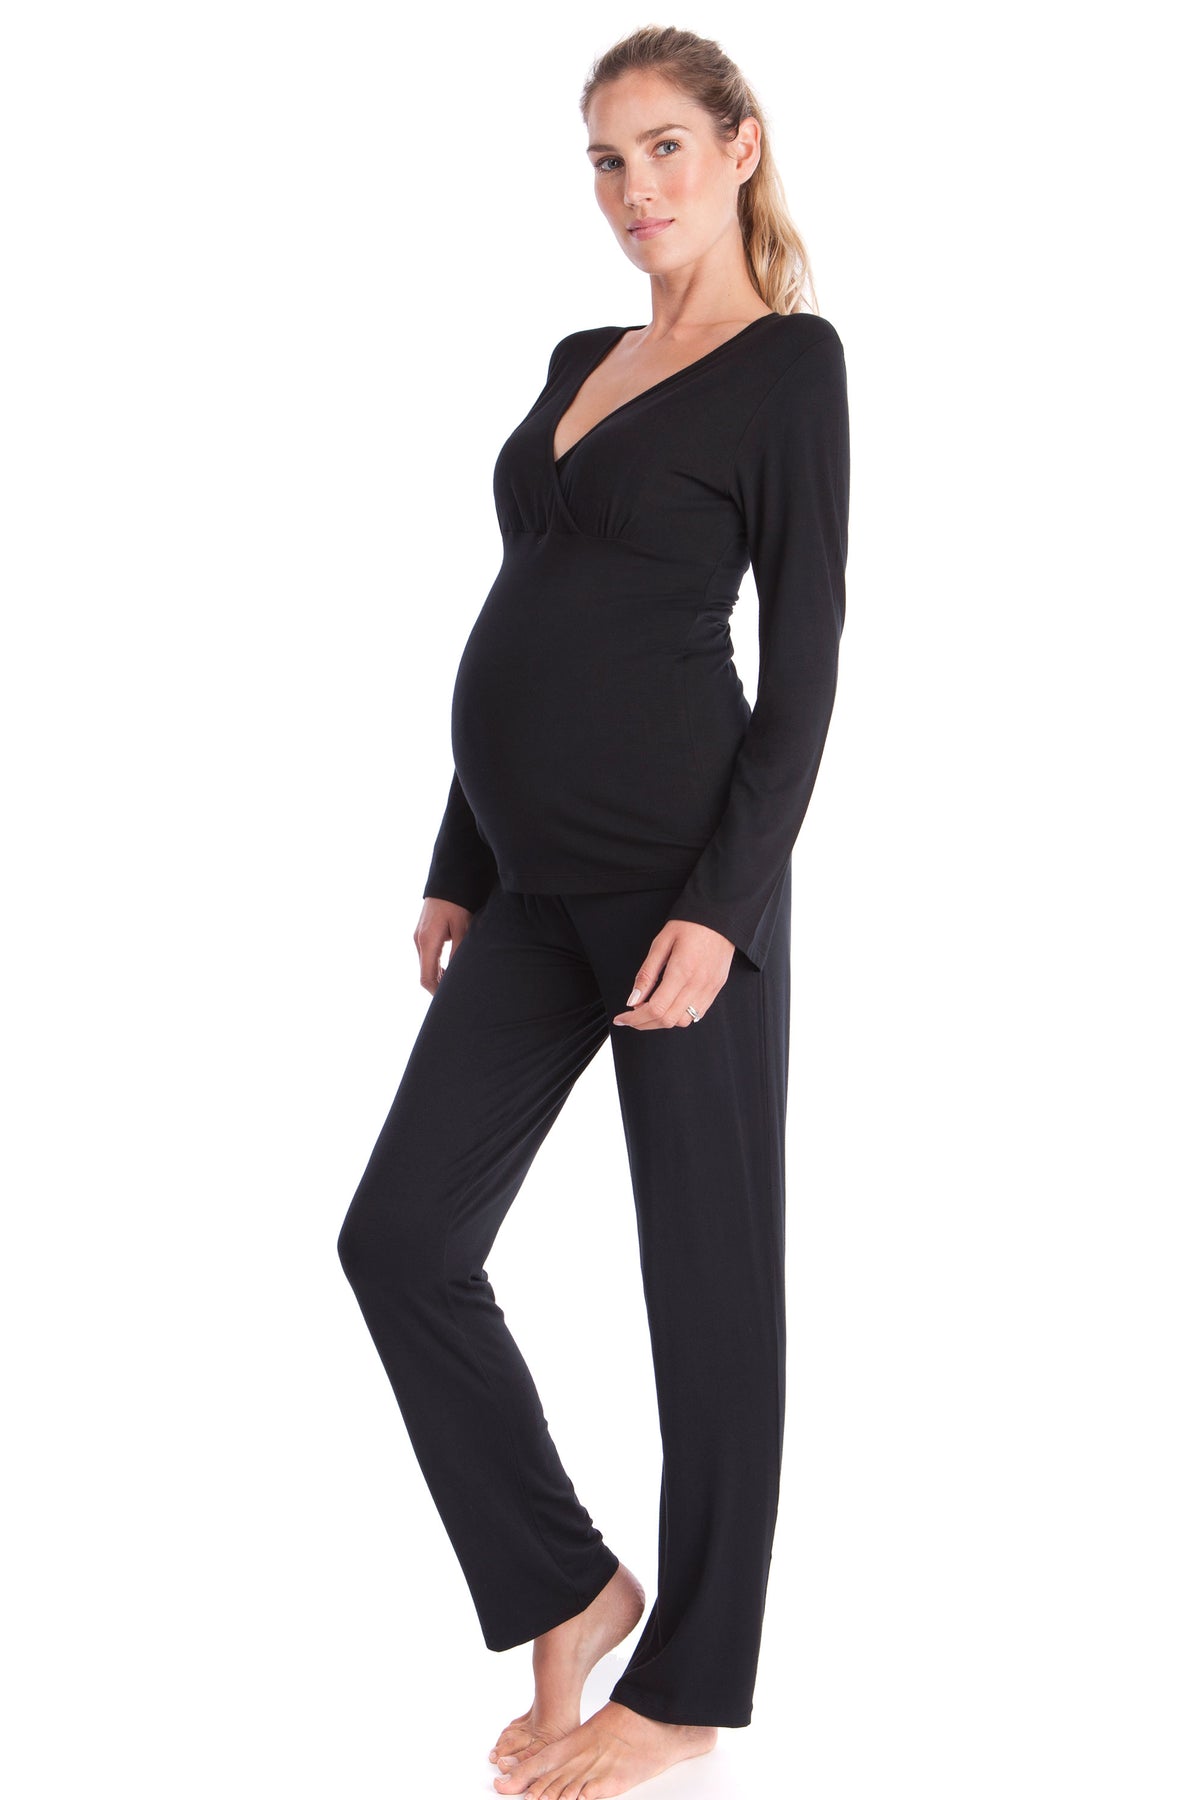 Kindred Bravely Camille Lace Maternity and Nursing Pajamas  Cami & Shorts  Maternity Loungewear (Black, X-Large) at  Women's Clothing store